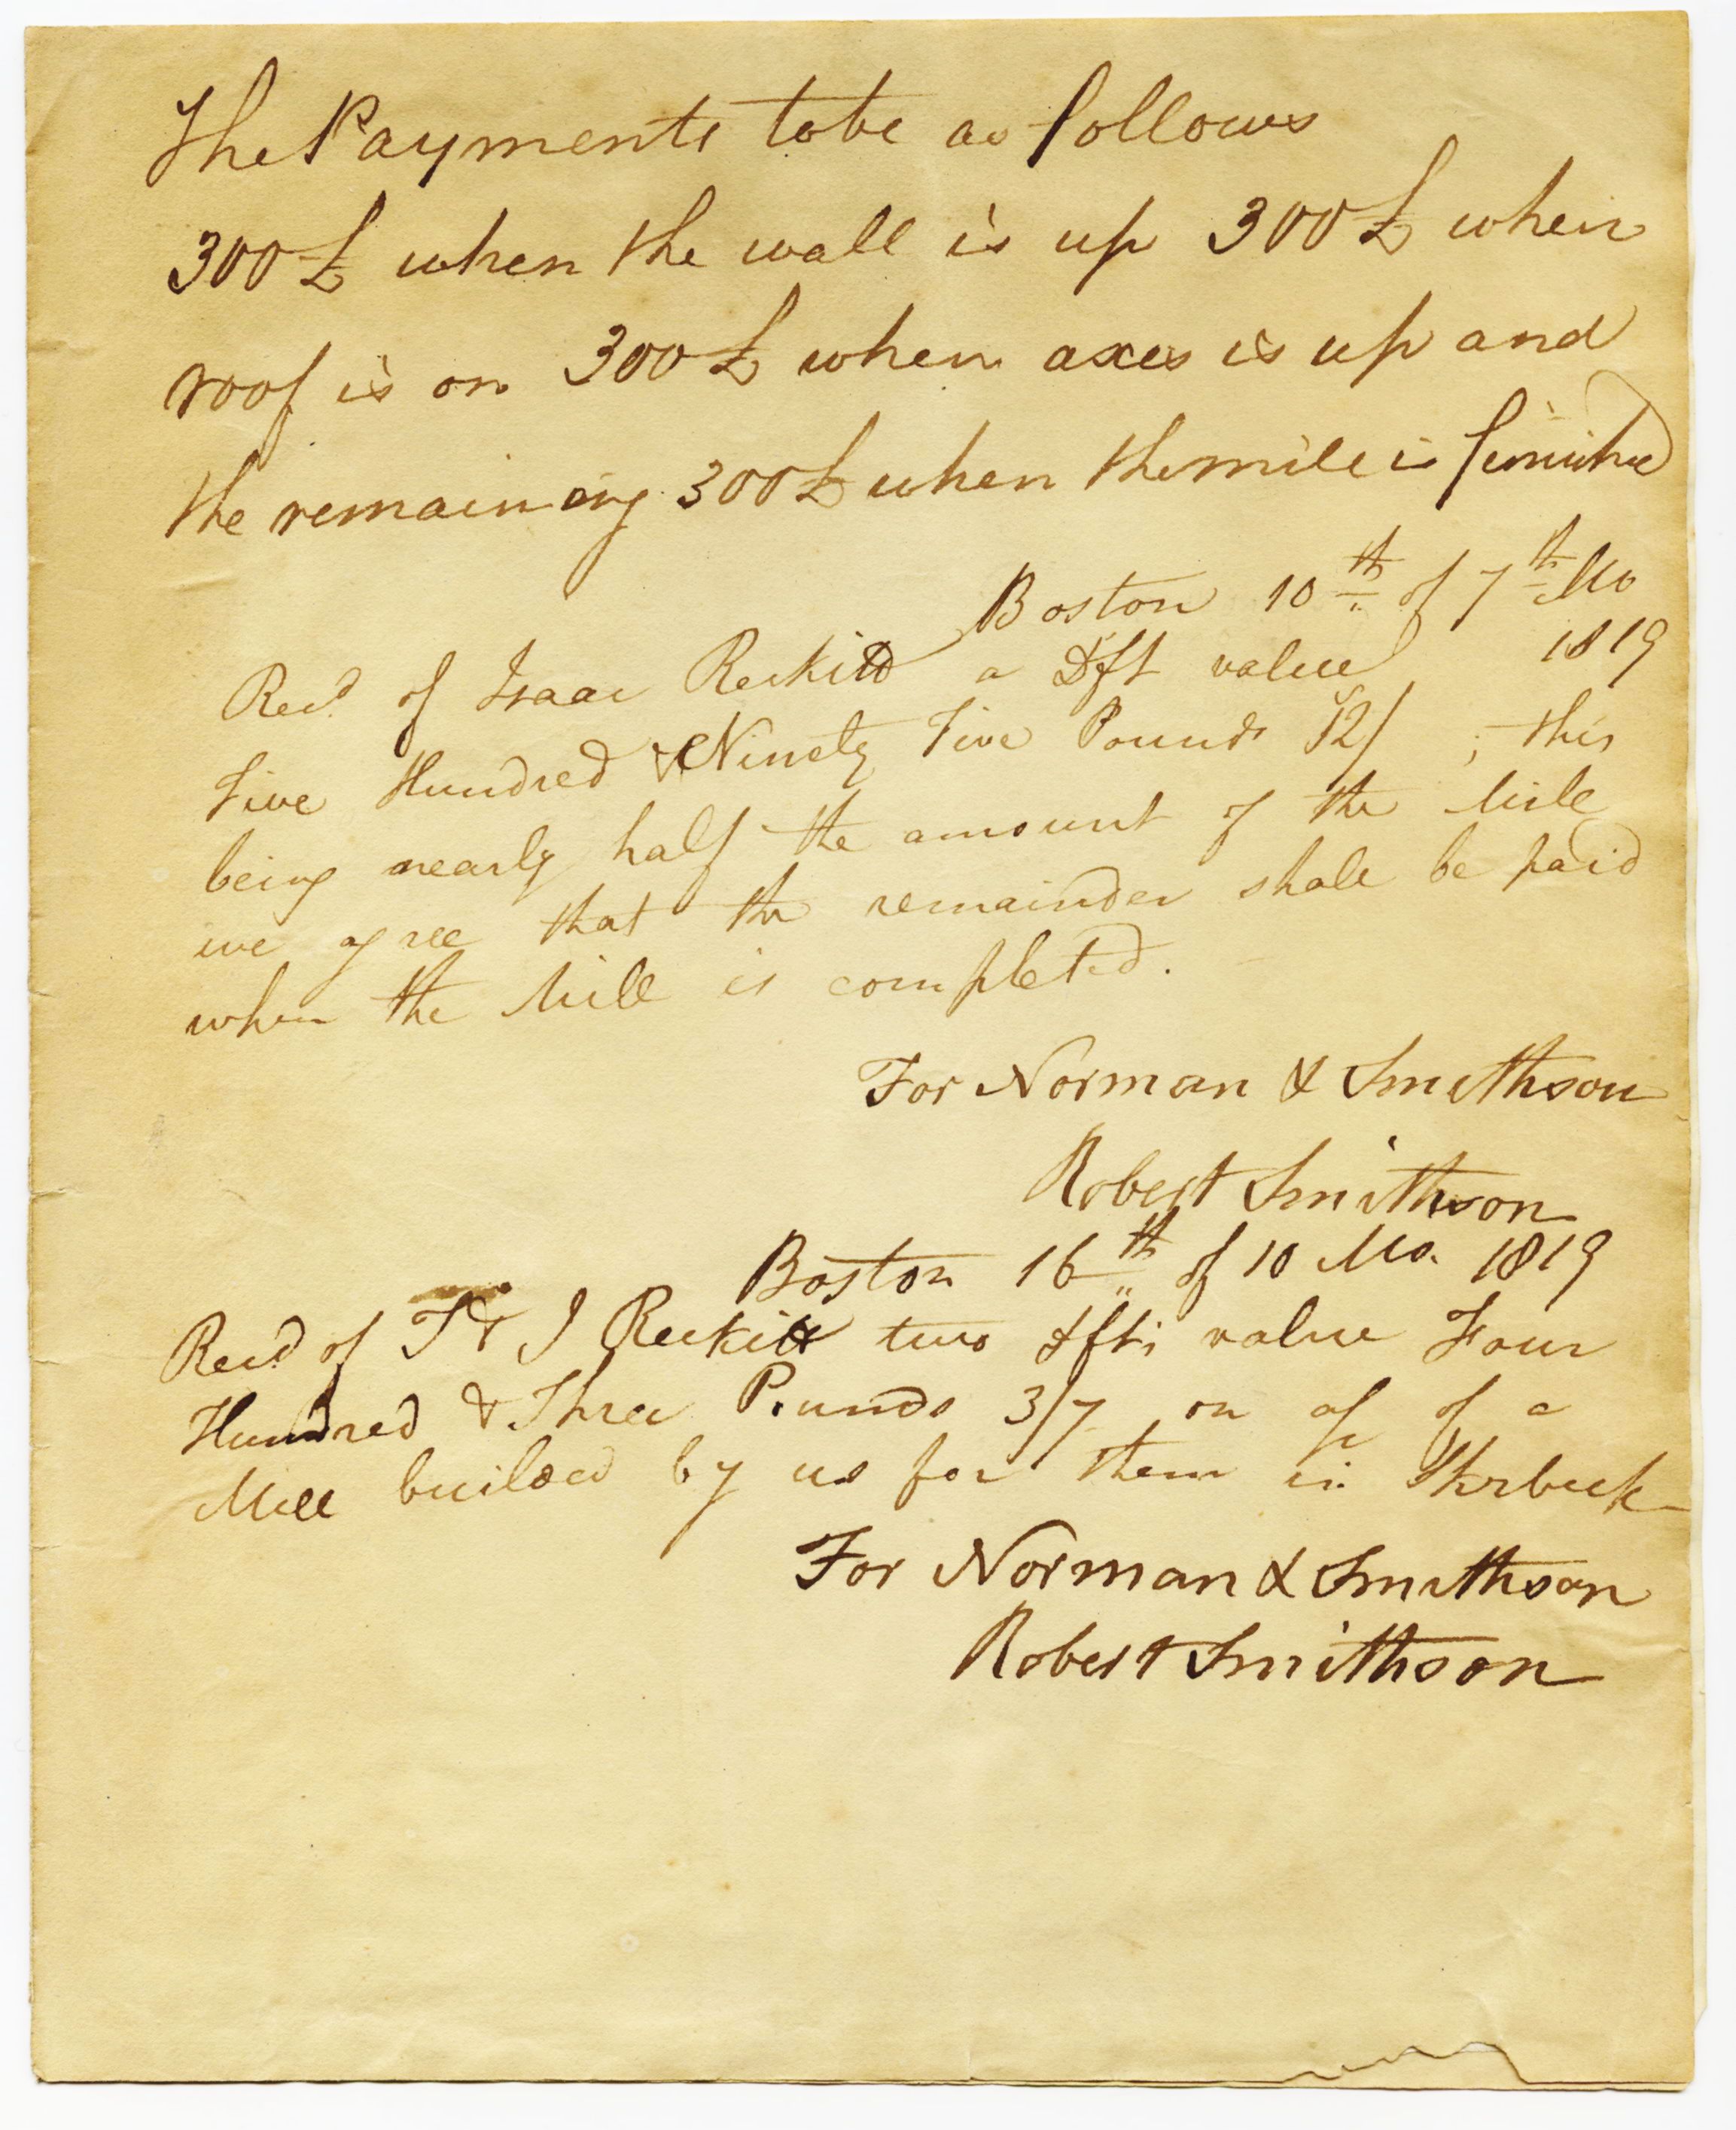 Second page of mill contract